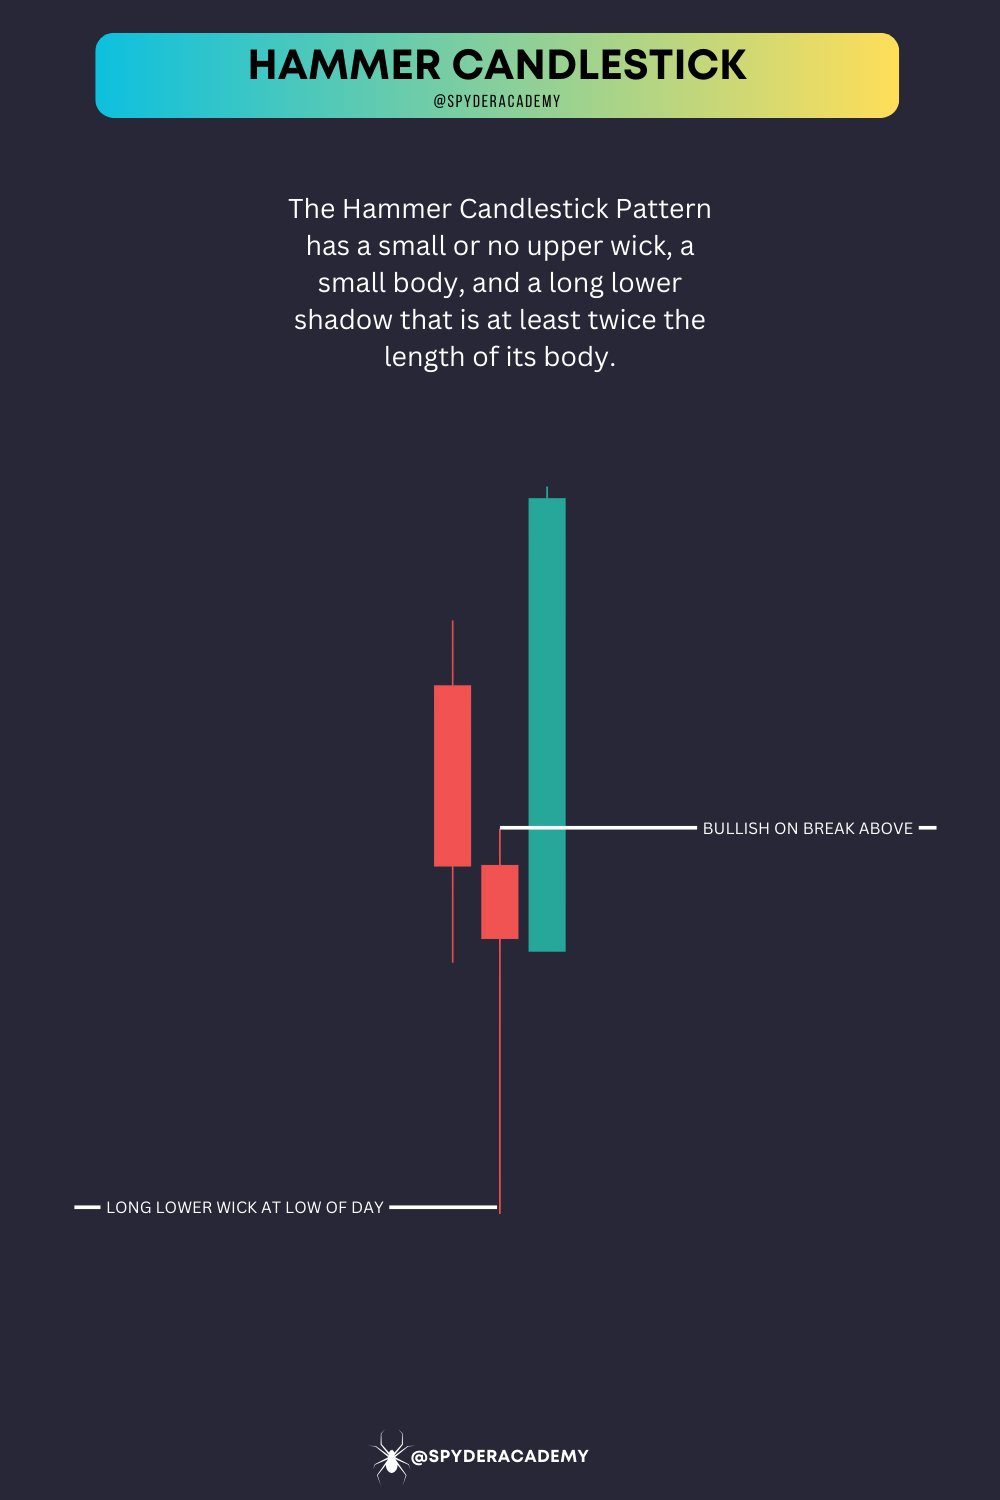 Explore the world of Doji candles and master the art of using Gravestones and Dragonflies for reversal signals. Learn how volume and key levels play a crucial role in your trading decisions.